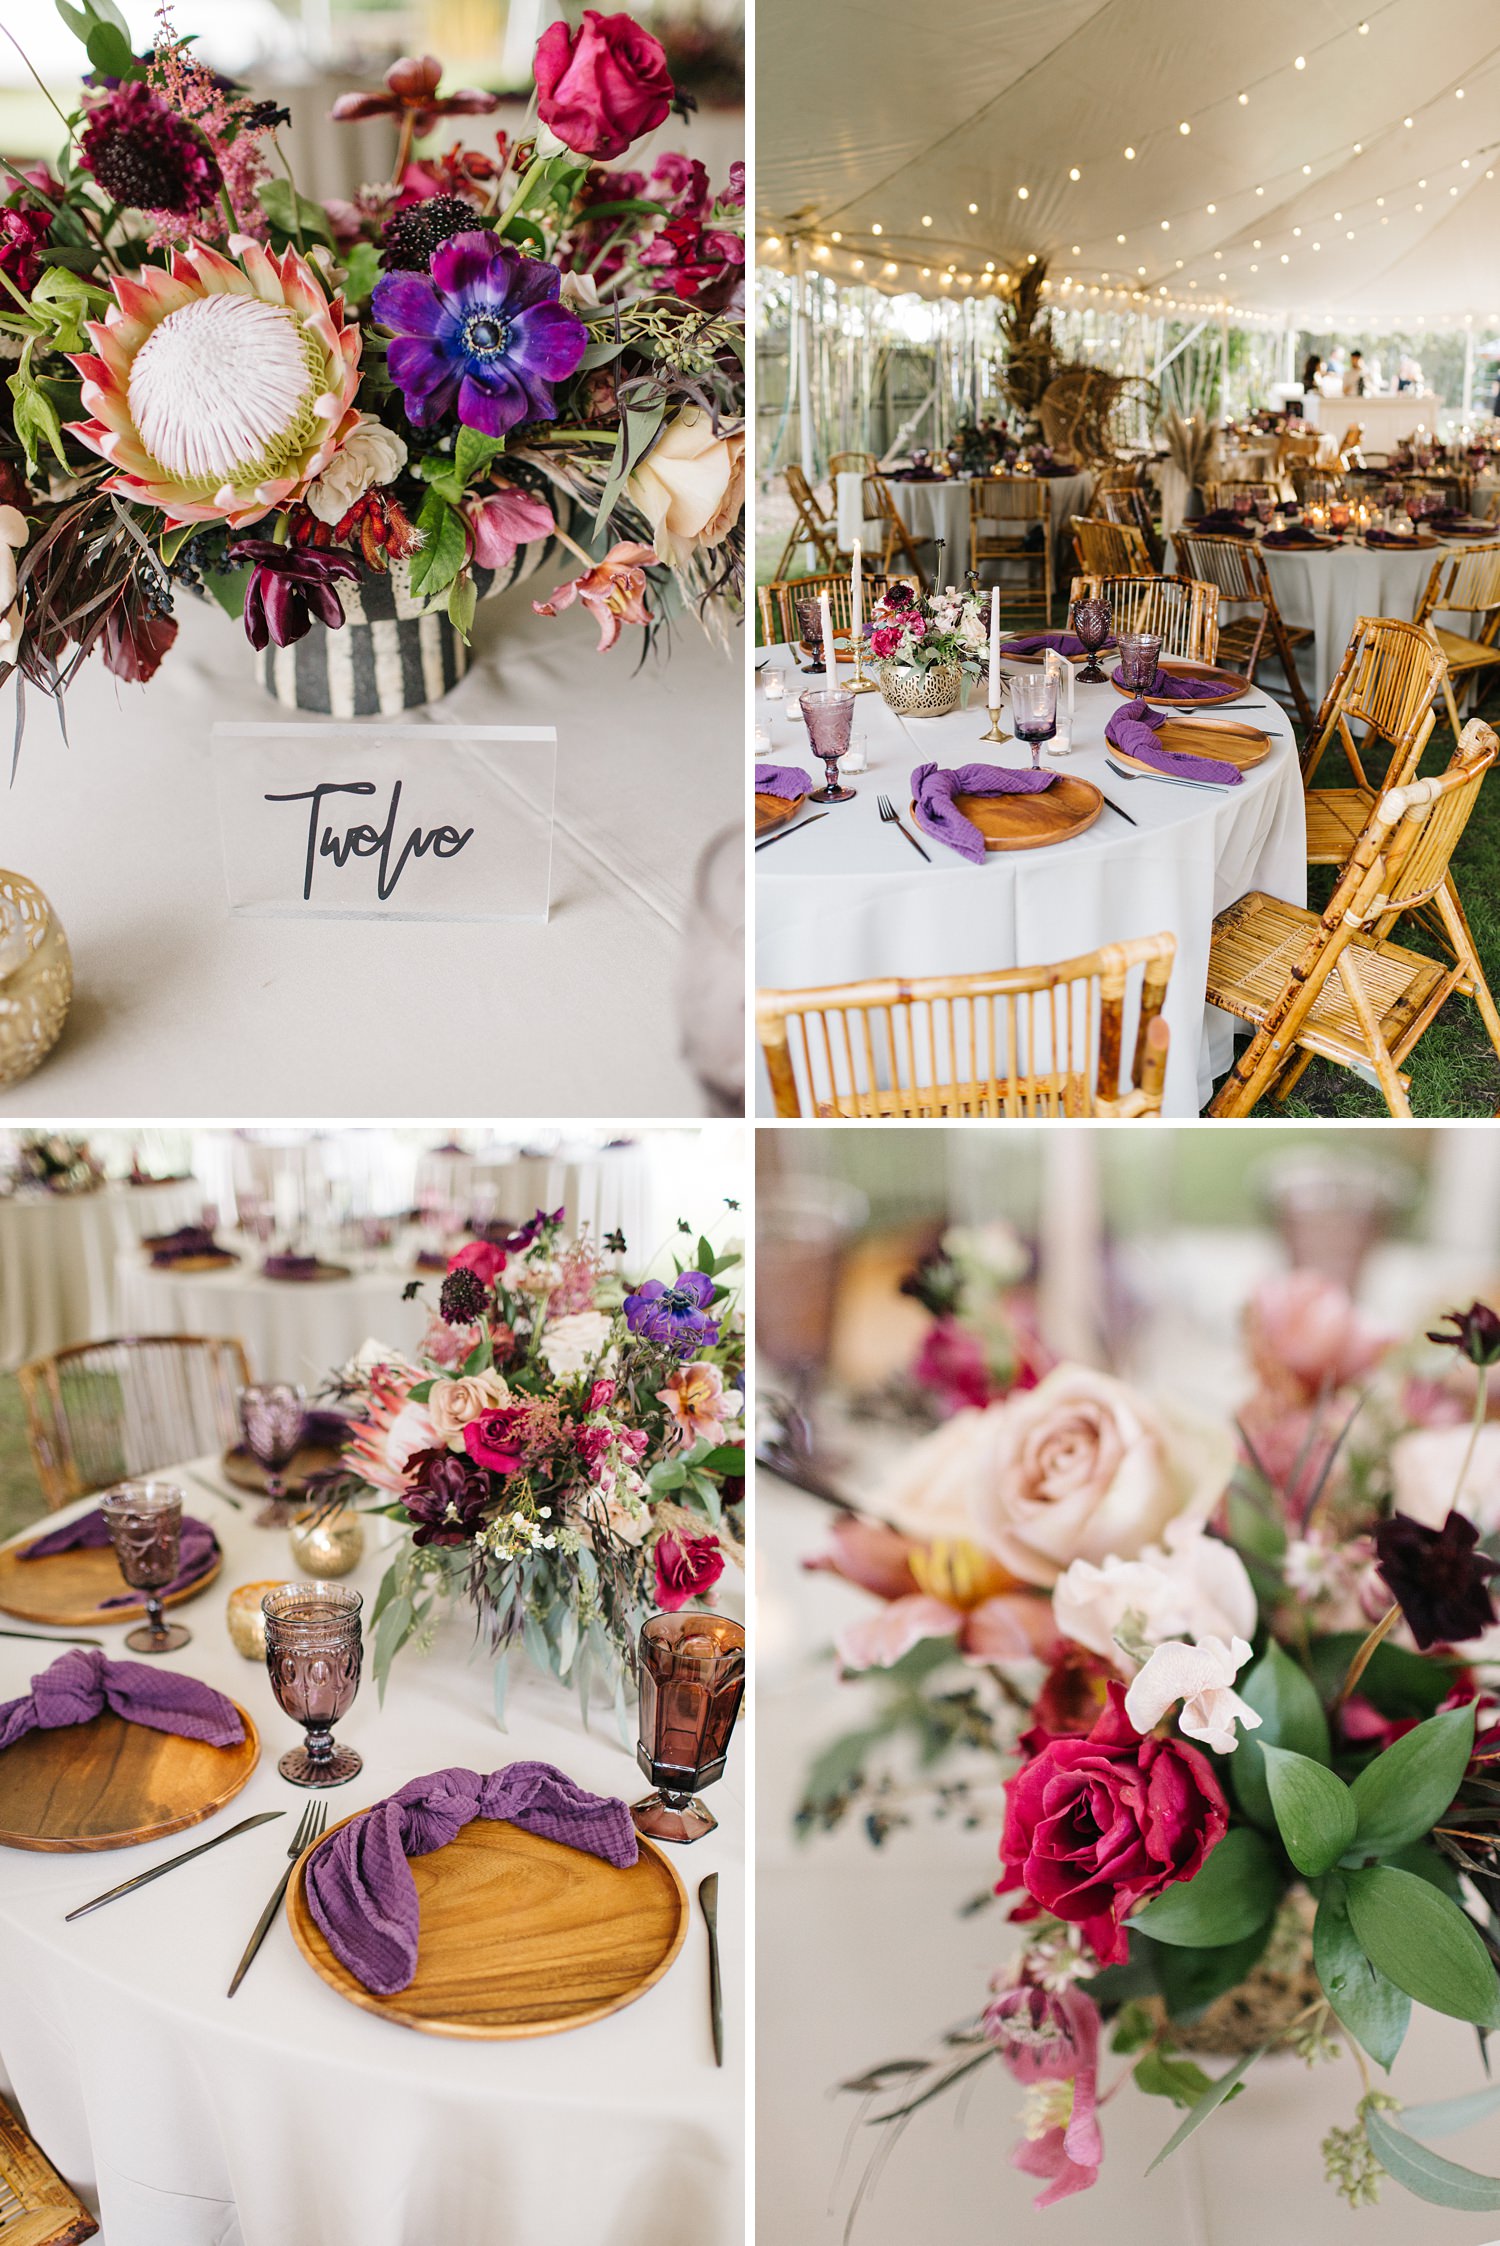 custom acrylic table numbers, wood chargers, and purple glassware for a boho reception at The Acre